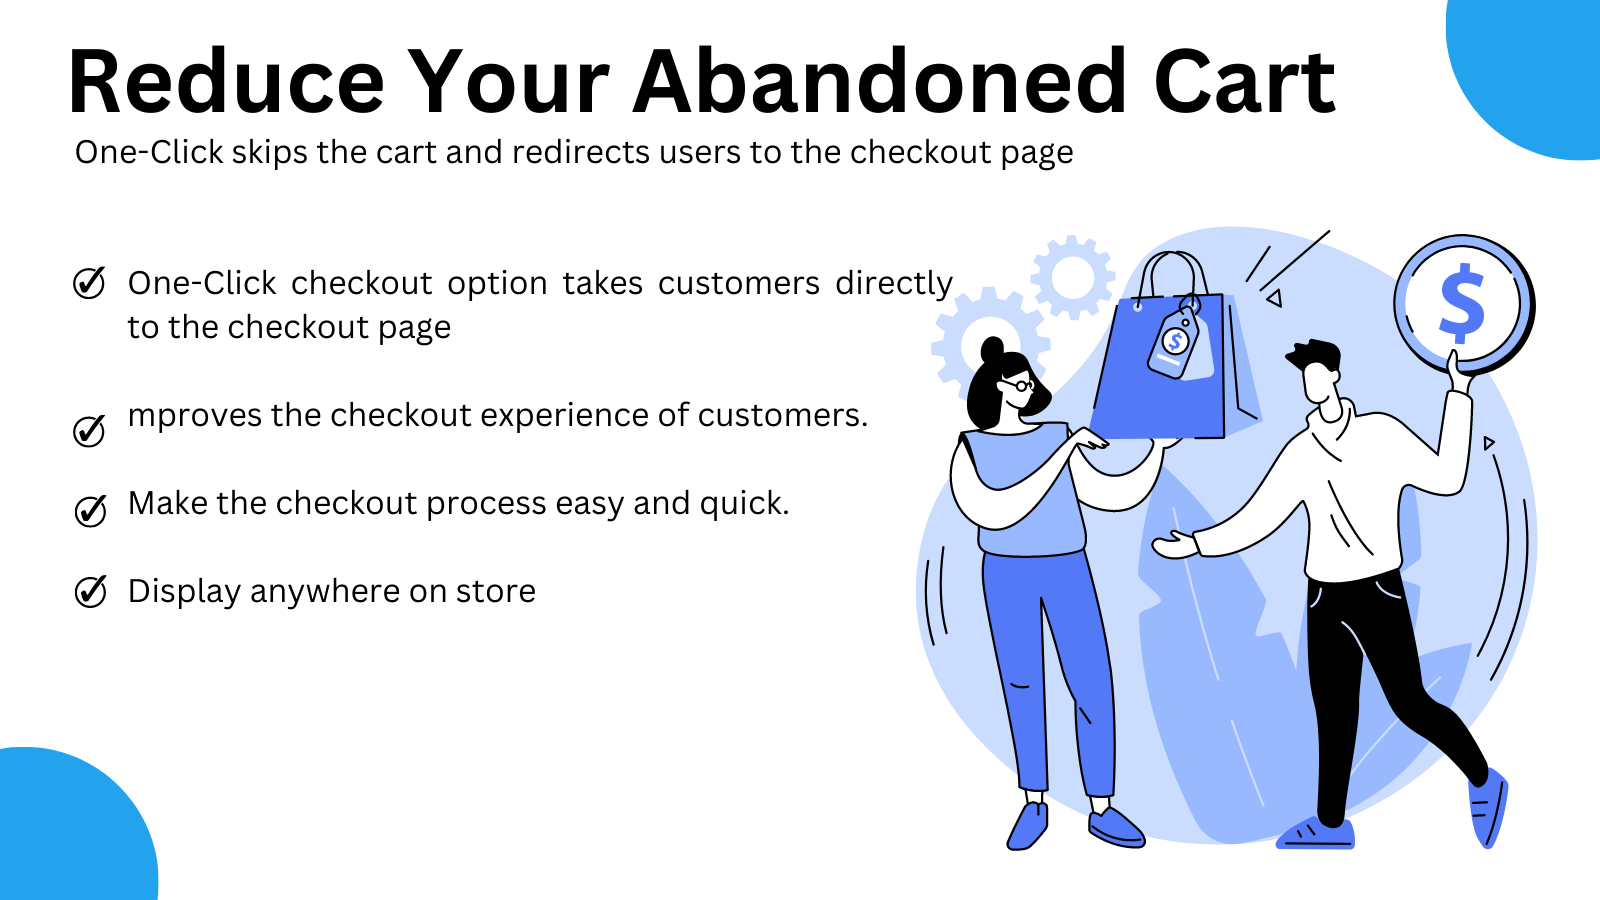 instant direct access to the checkout page